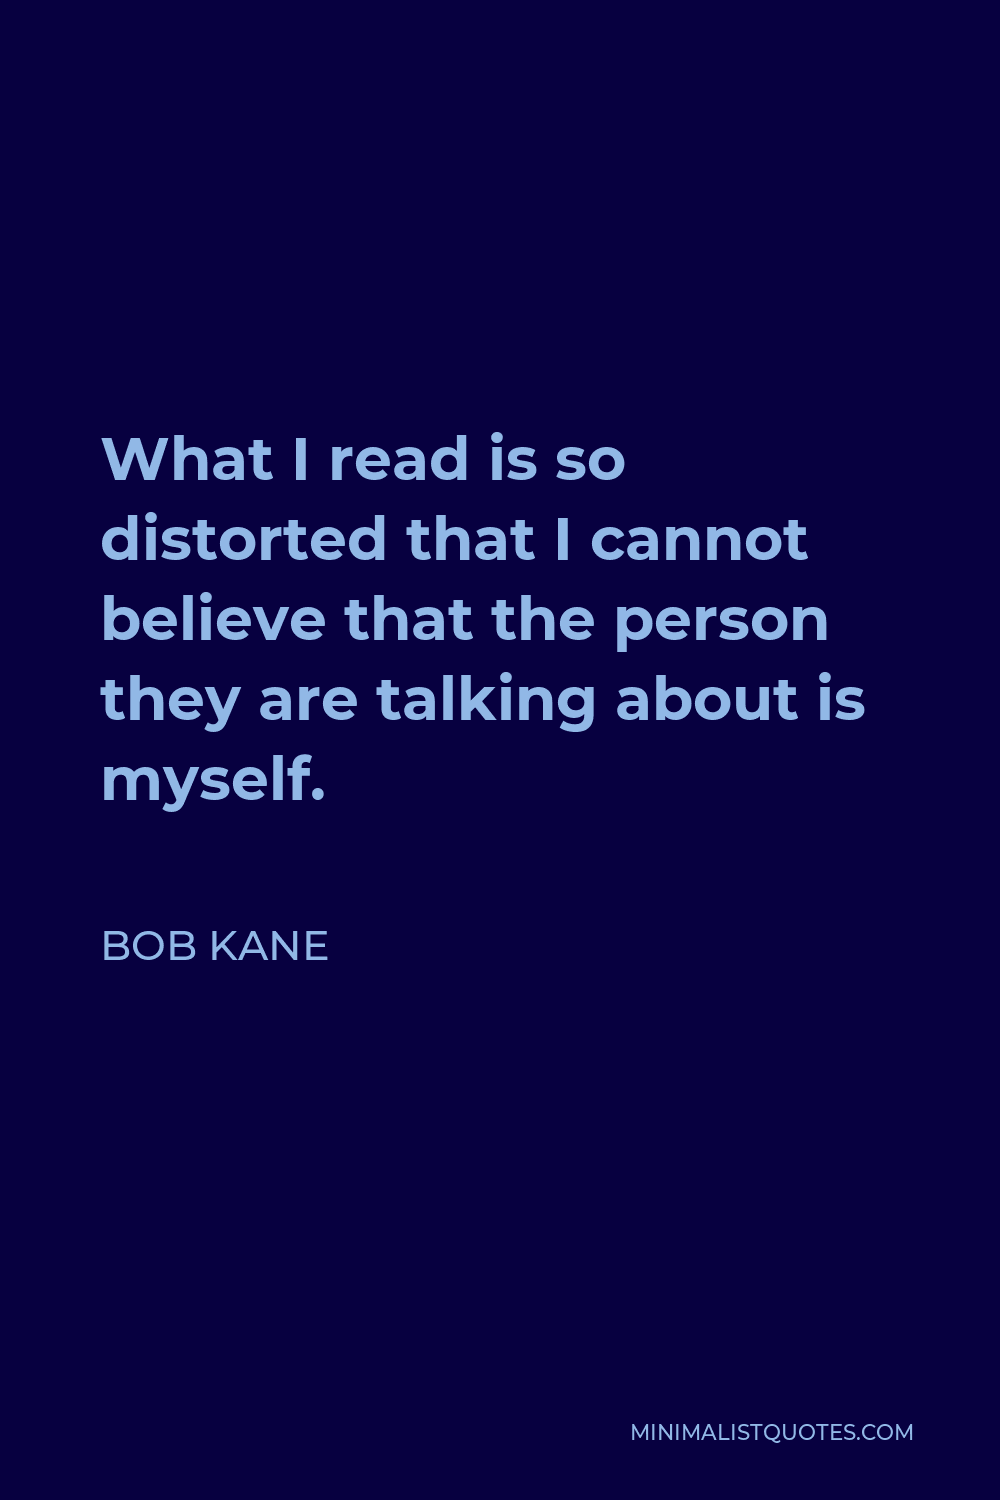 Bob Kane Quote - What I read is so distorted that I cannot believe that the person they are talking about is myself.